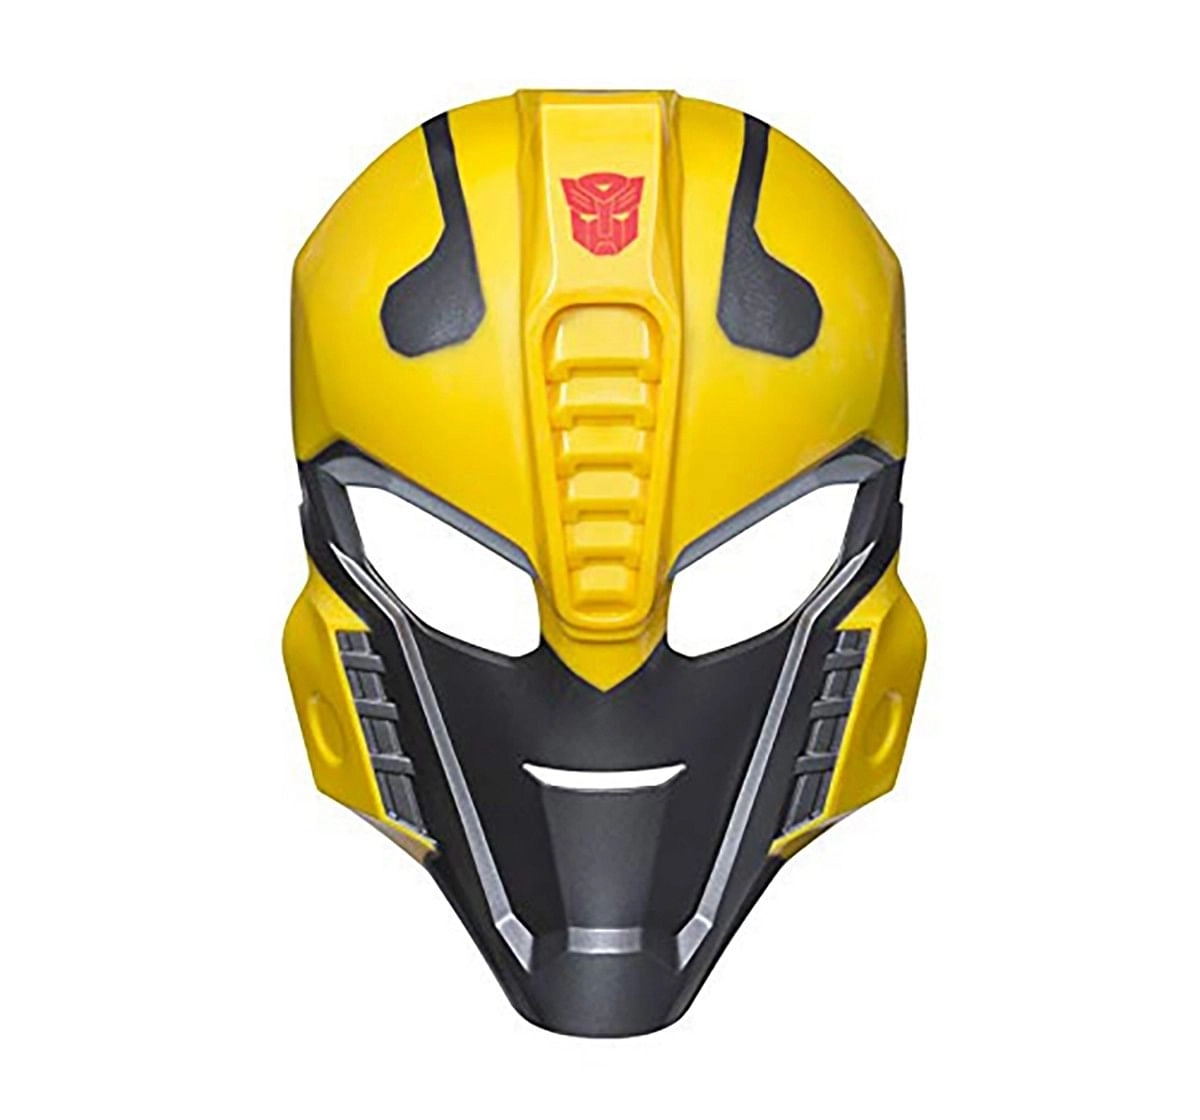 Transformers Bumblebee Mask Action Figure Play Sets for Kids age 5Y+ 